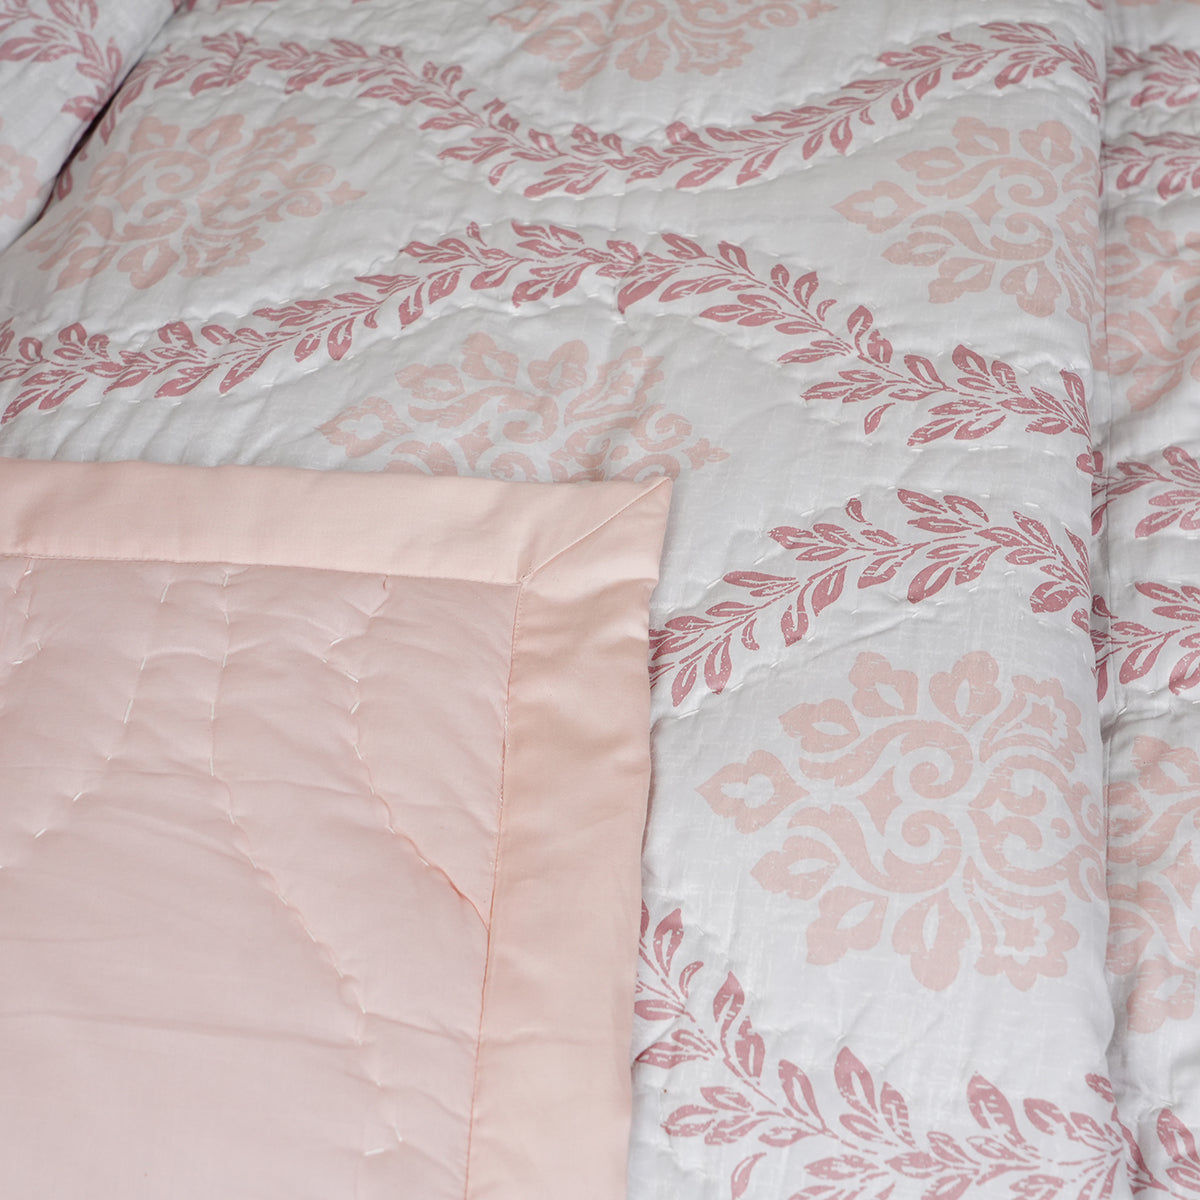 Tranquil Essence Lawn Leaflet Peach Summer AC Quilt/Quilted Bed Cover/Comforter